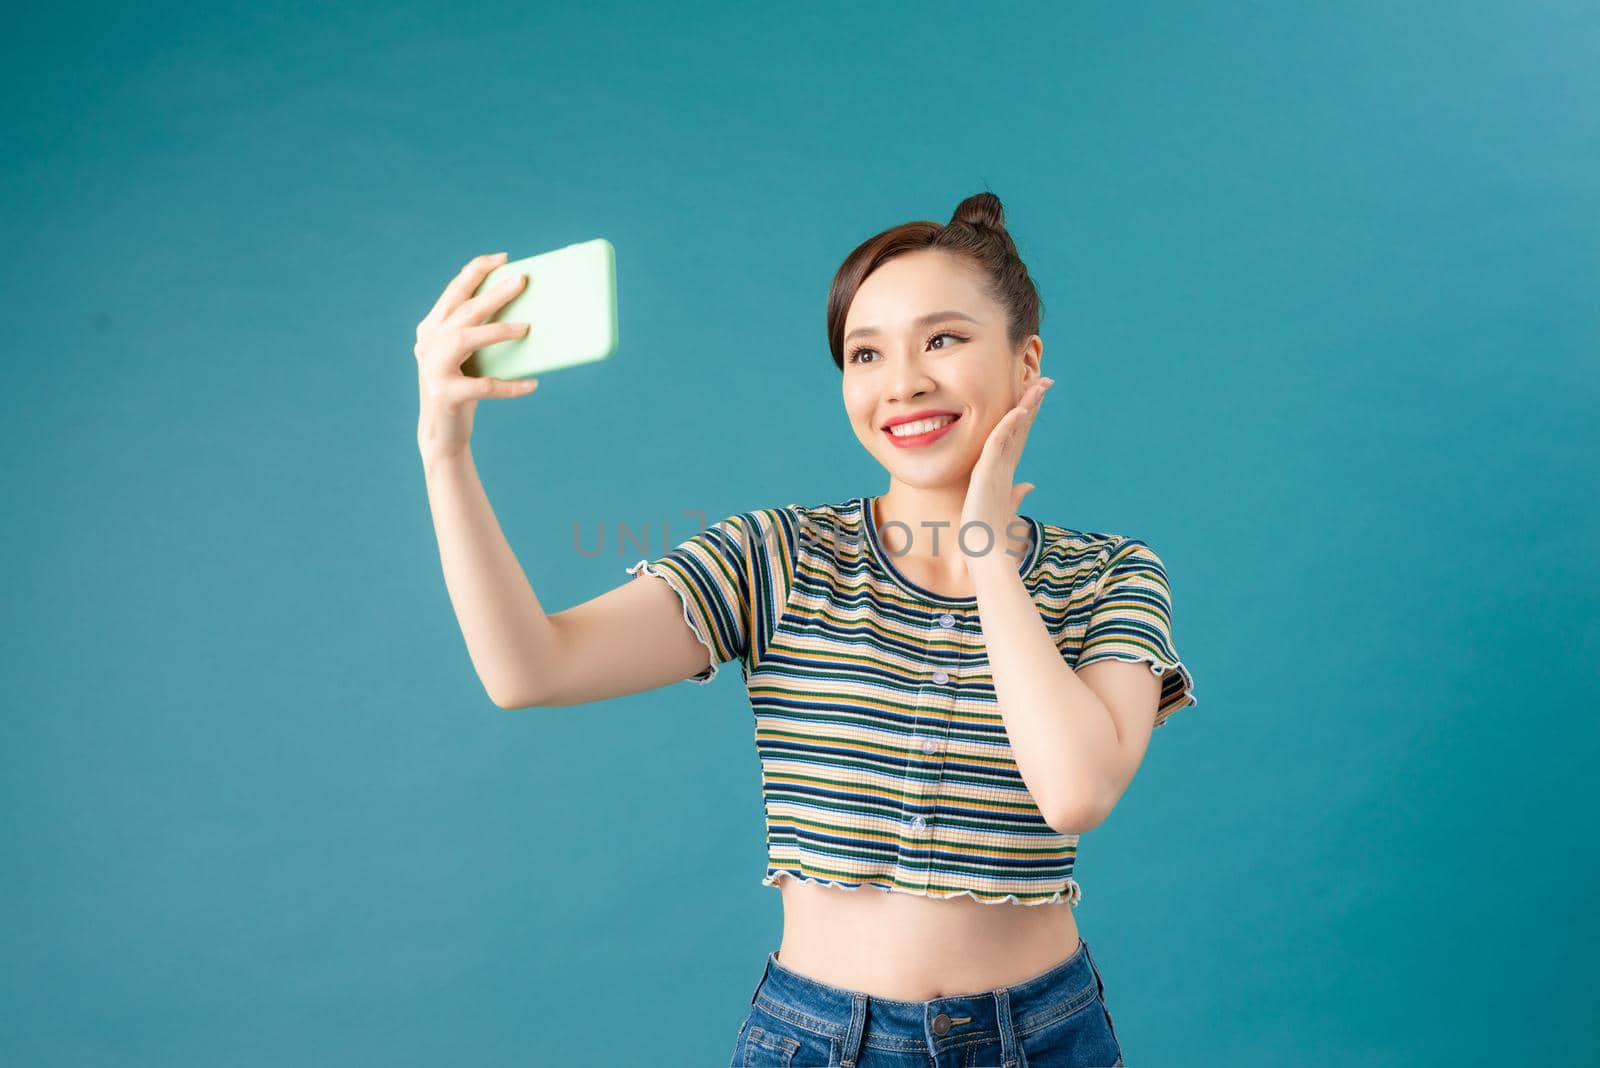 Smiling woman making selfie photo on smartphone over blue background by makidotvn